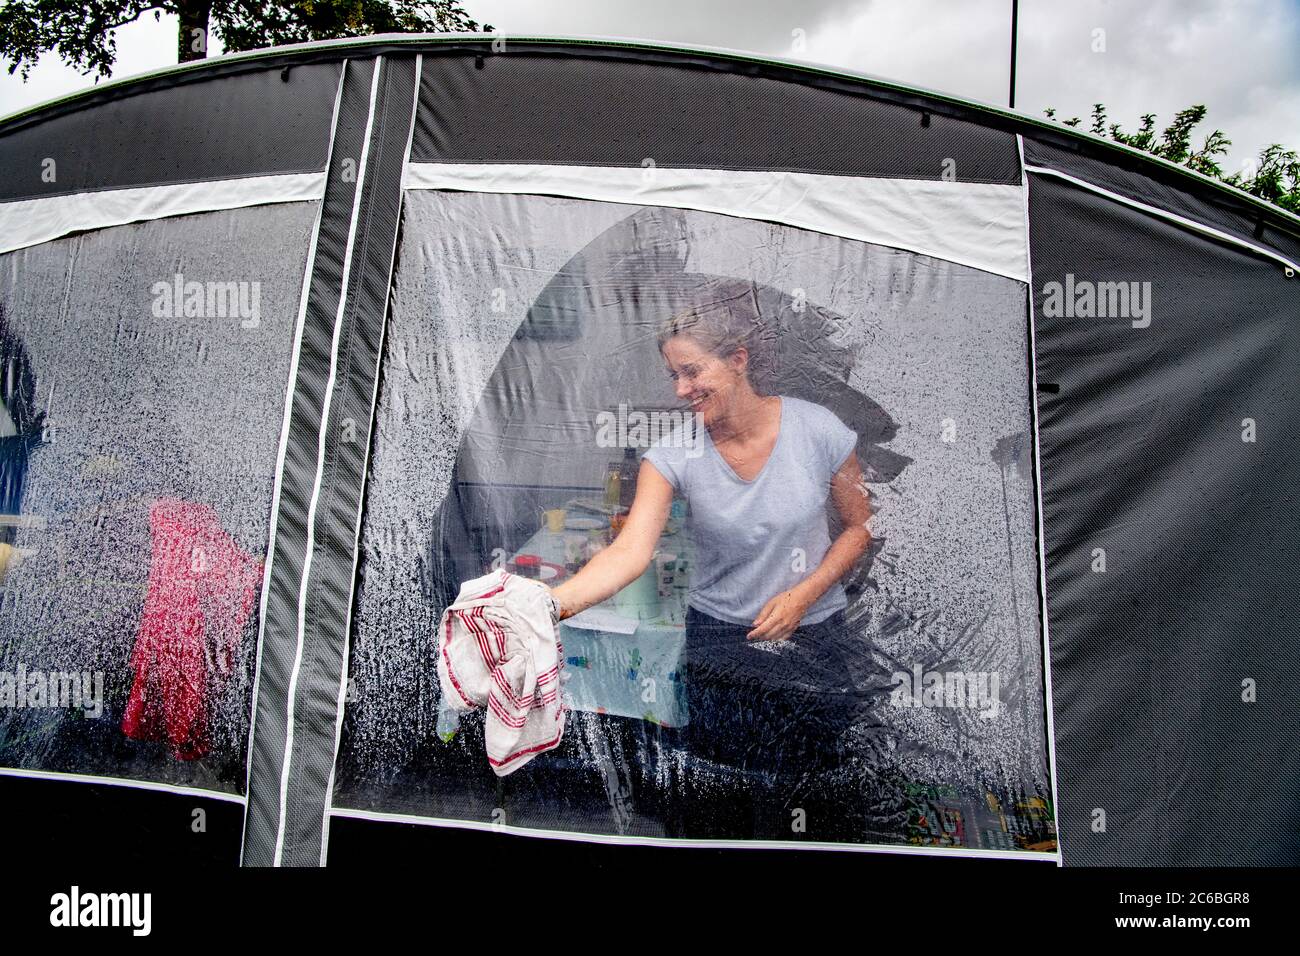 A woman camper is seen cleaning the morning mist off her tent during the summer holidays.Due to the coronavirus crisis, many Dutch citizens have taken to touring their own country during the summer holidays, many of them are seen at camping Ons Buiten in Oostkapelle, Zeeland. Stock Photo